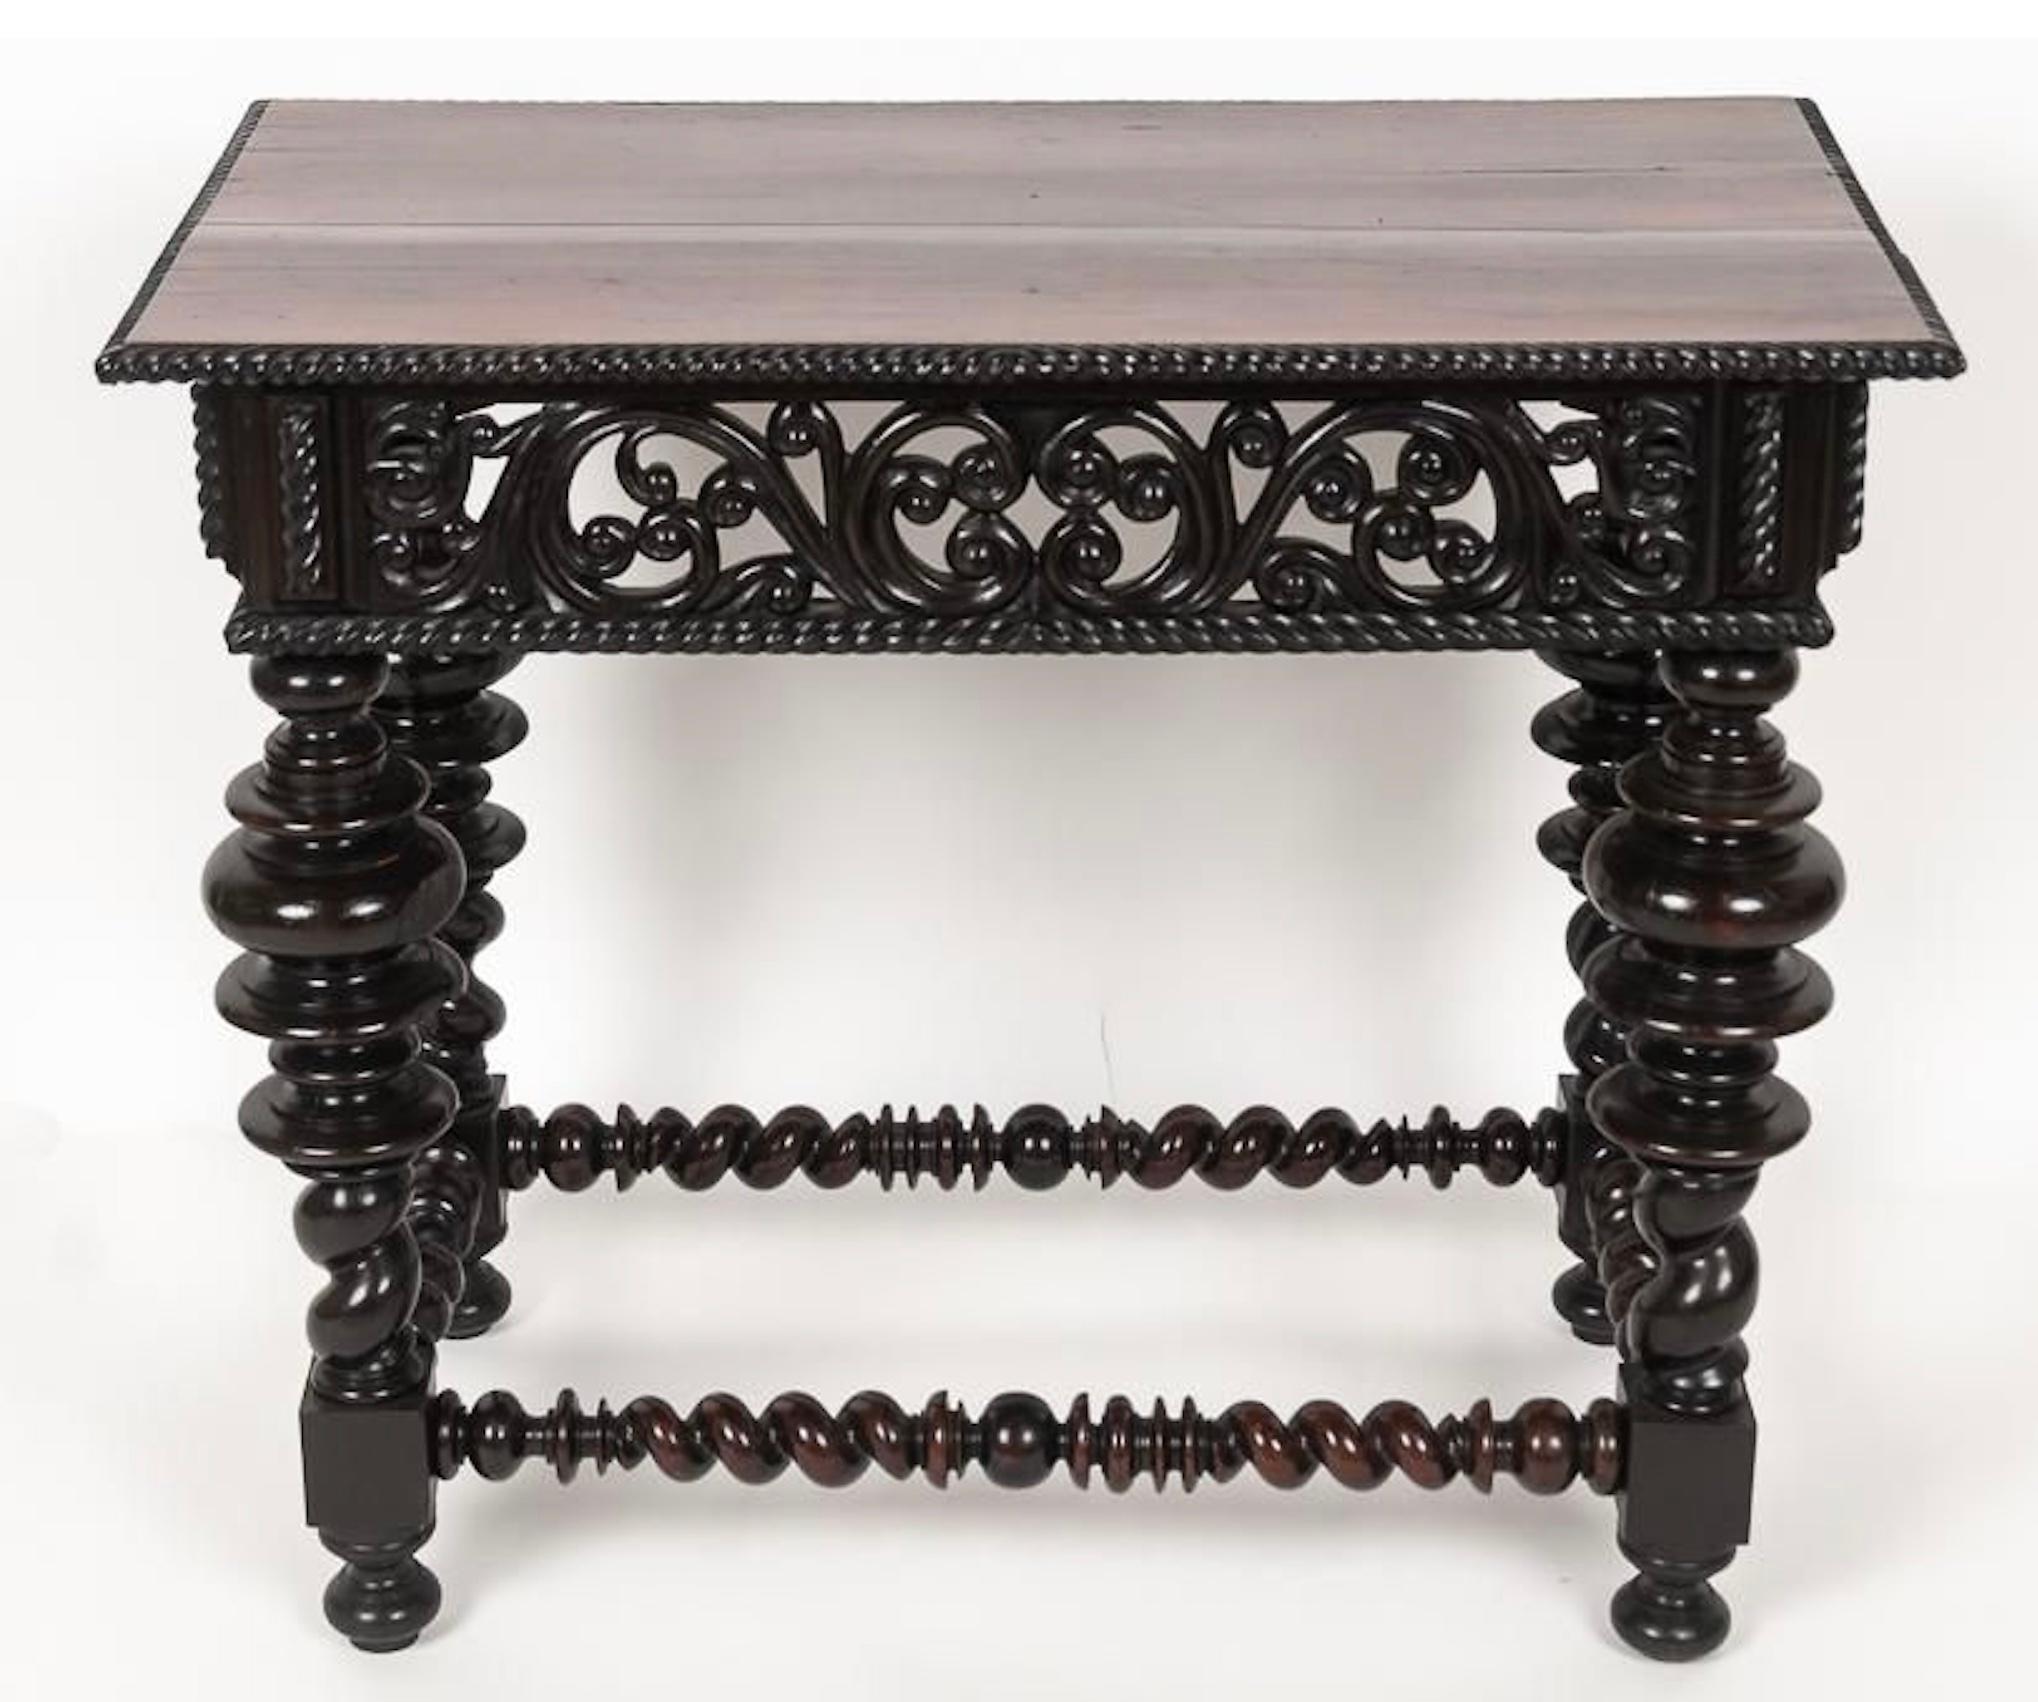 Baroque Revival Antique Portuguese Carved Rosewood Side Table With Bulbous Turnings Early 19th C For Sale